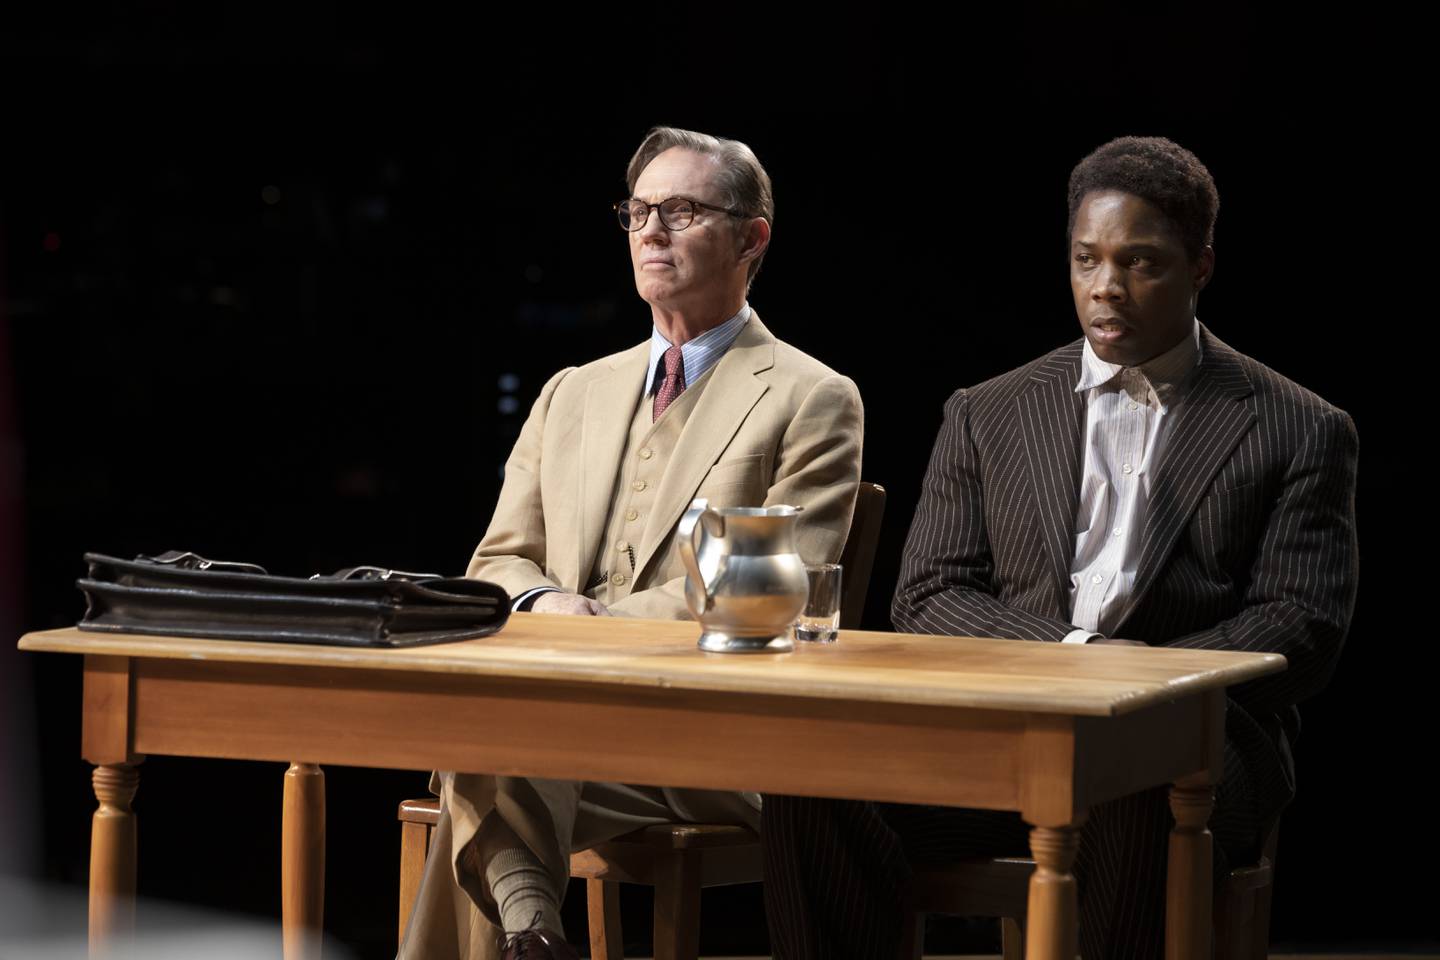 Richard Thomas (Atticus Finch, from left) and Yaegel T. Welch (Tom Robinson).